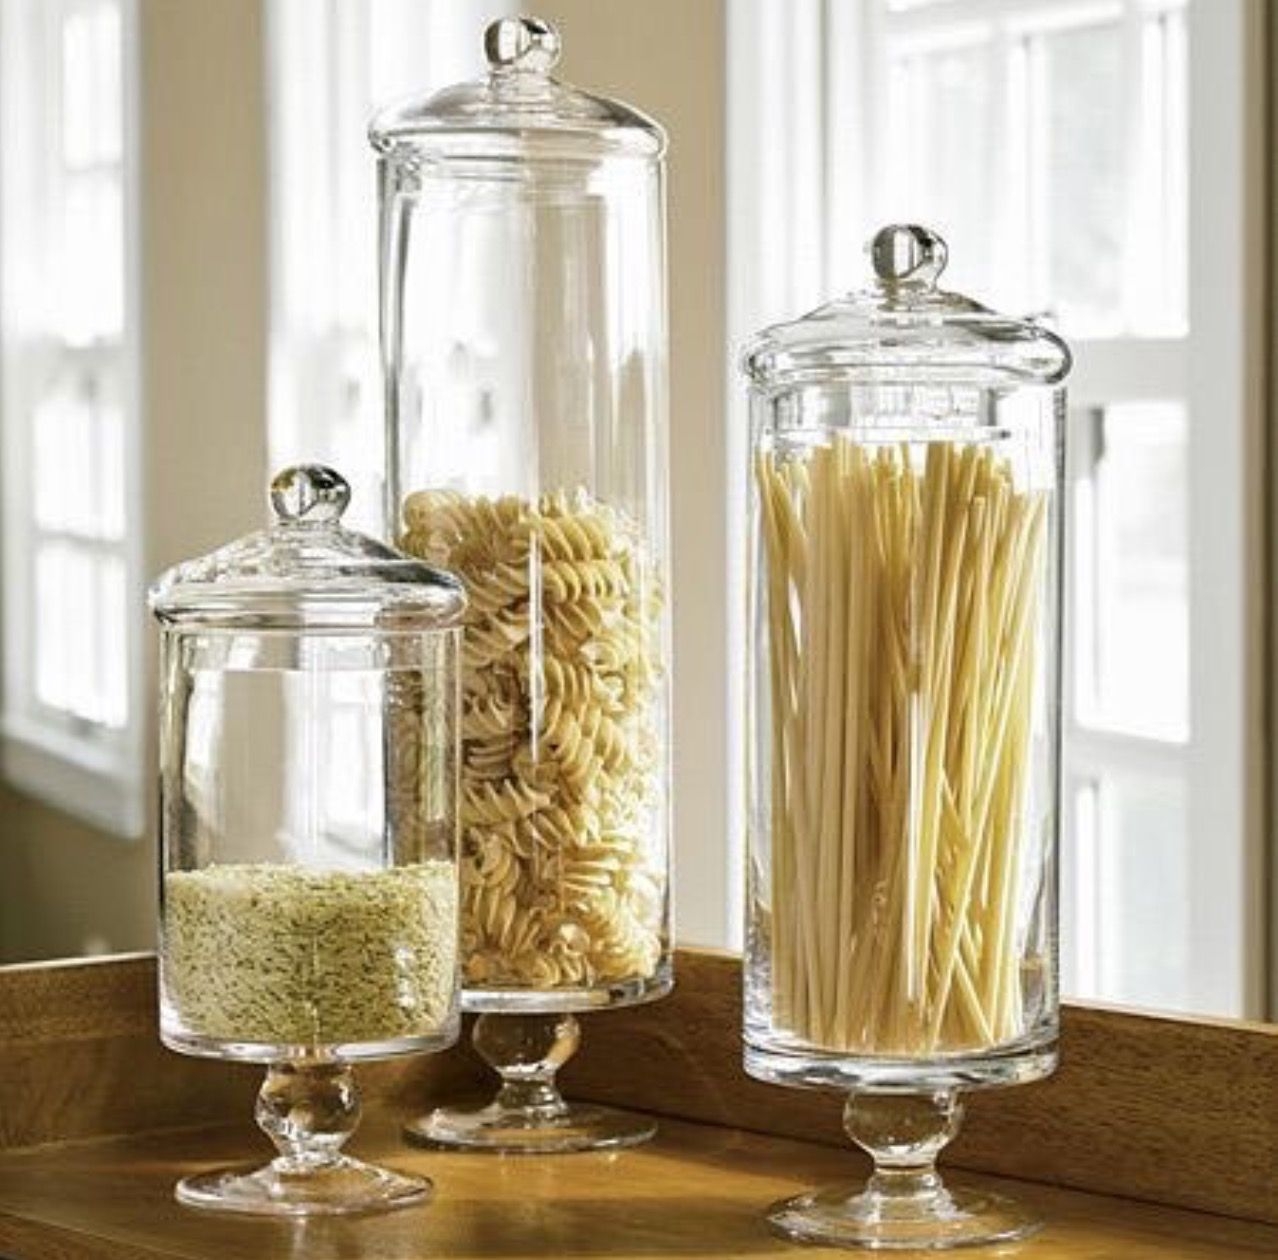 Decorative kitchen canisters 4